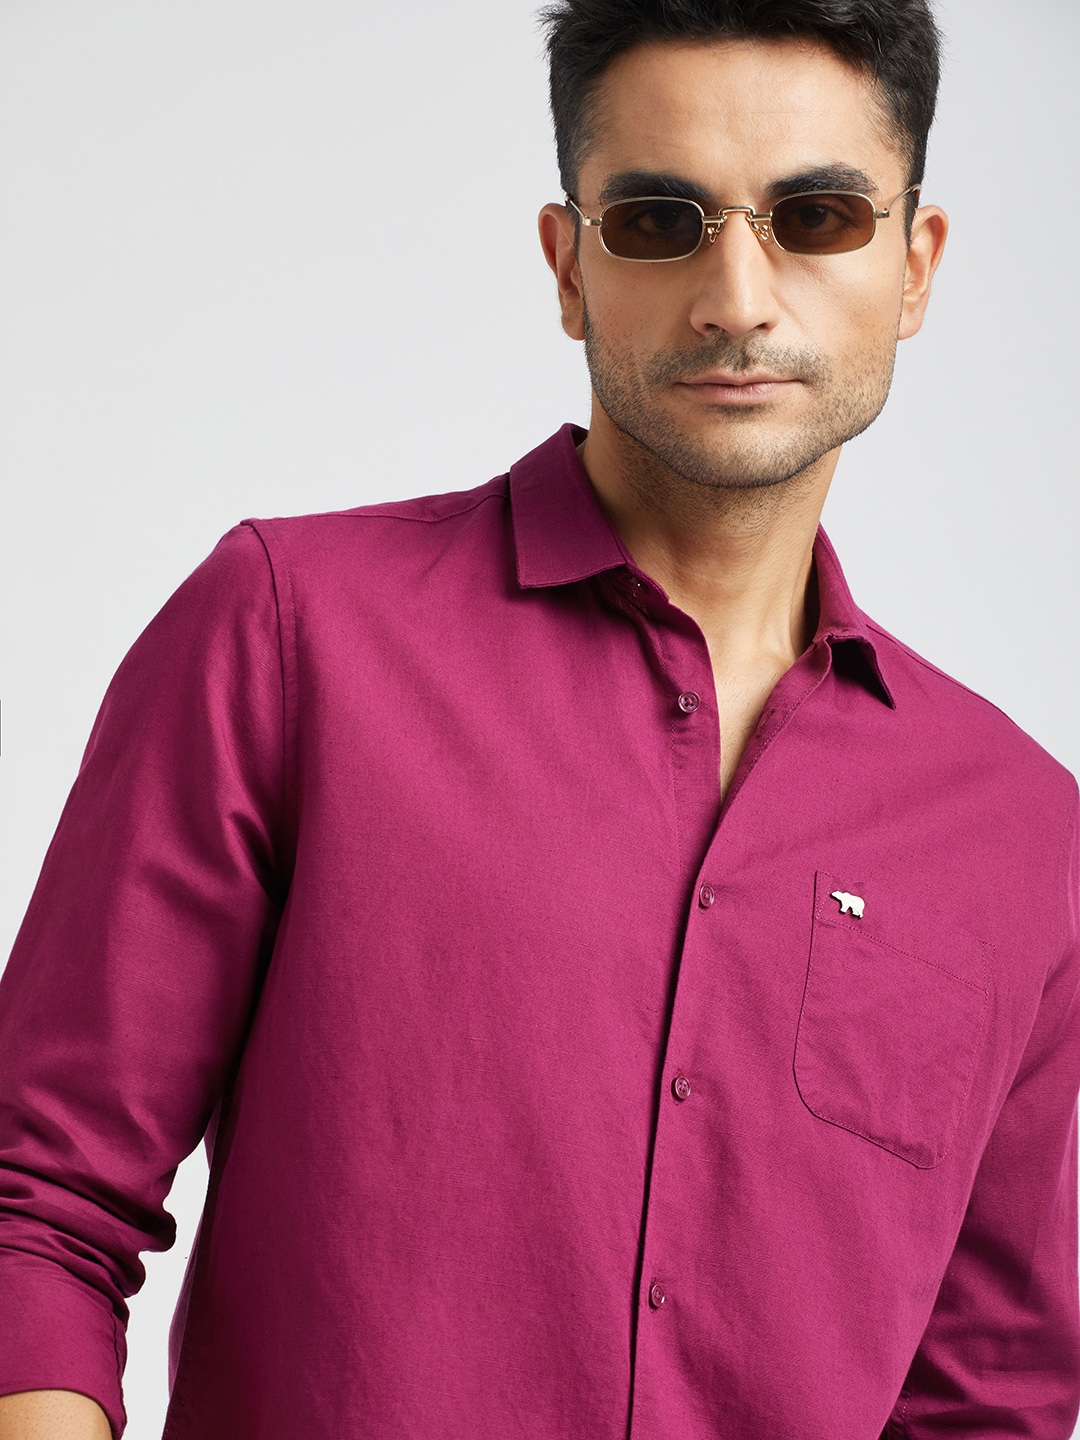 HILO Design Comfort Embellished Detail Cotton Casual Shirt (41) by Myntra